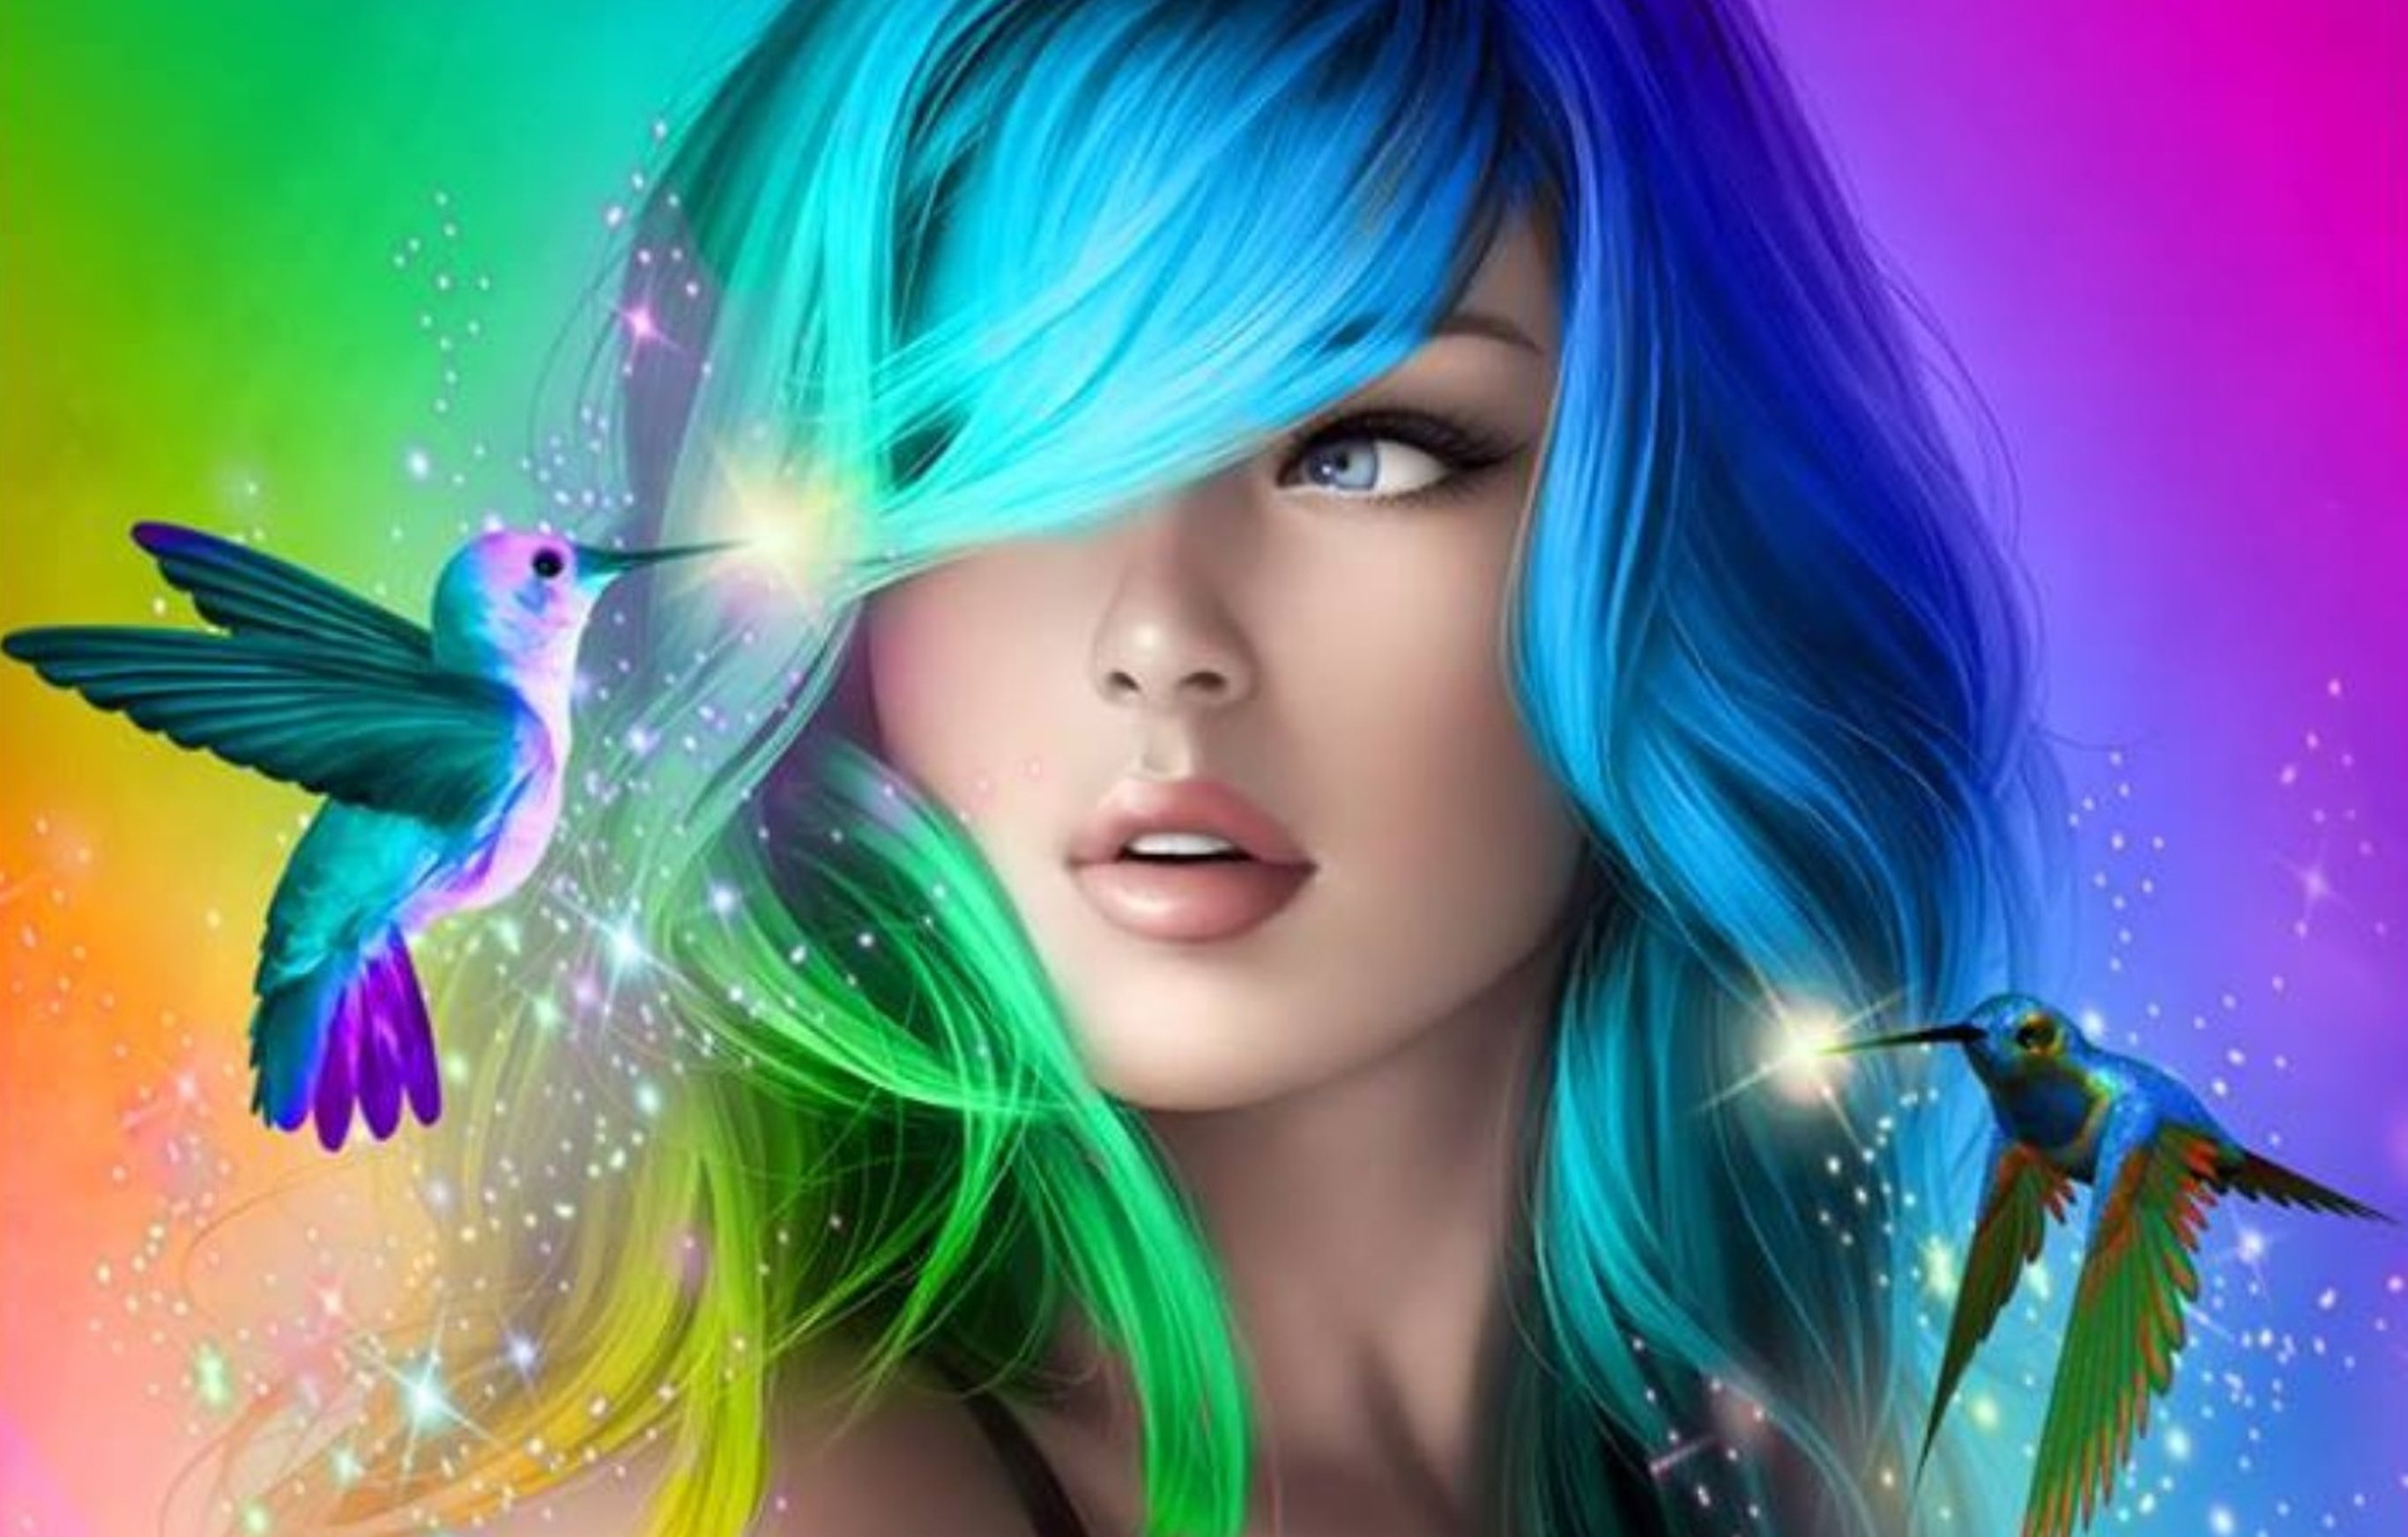 Girl Art Face Wallpaper Hd Fantasy K Wallpapers Images Photos And Hot Sex Picture 